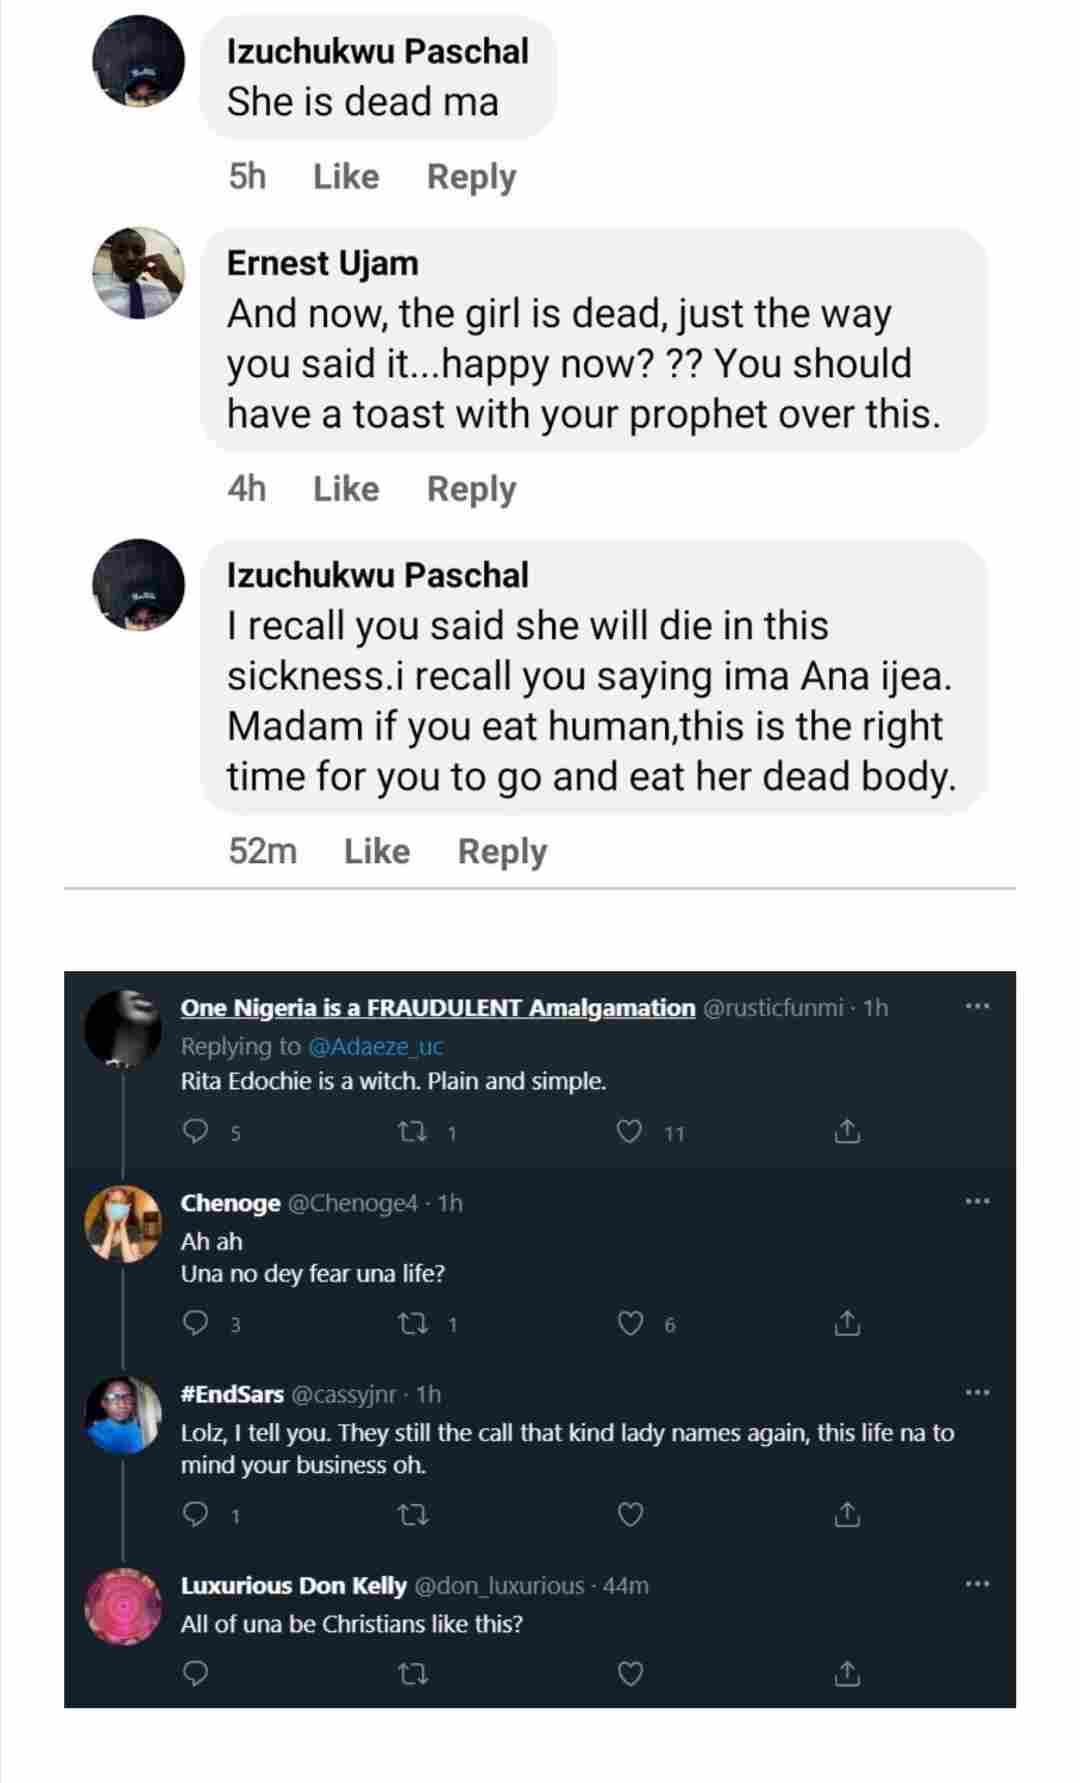 Rita Edochie over what she told Ada Jesus before her death.